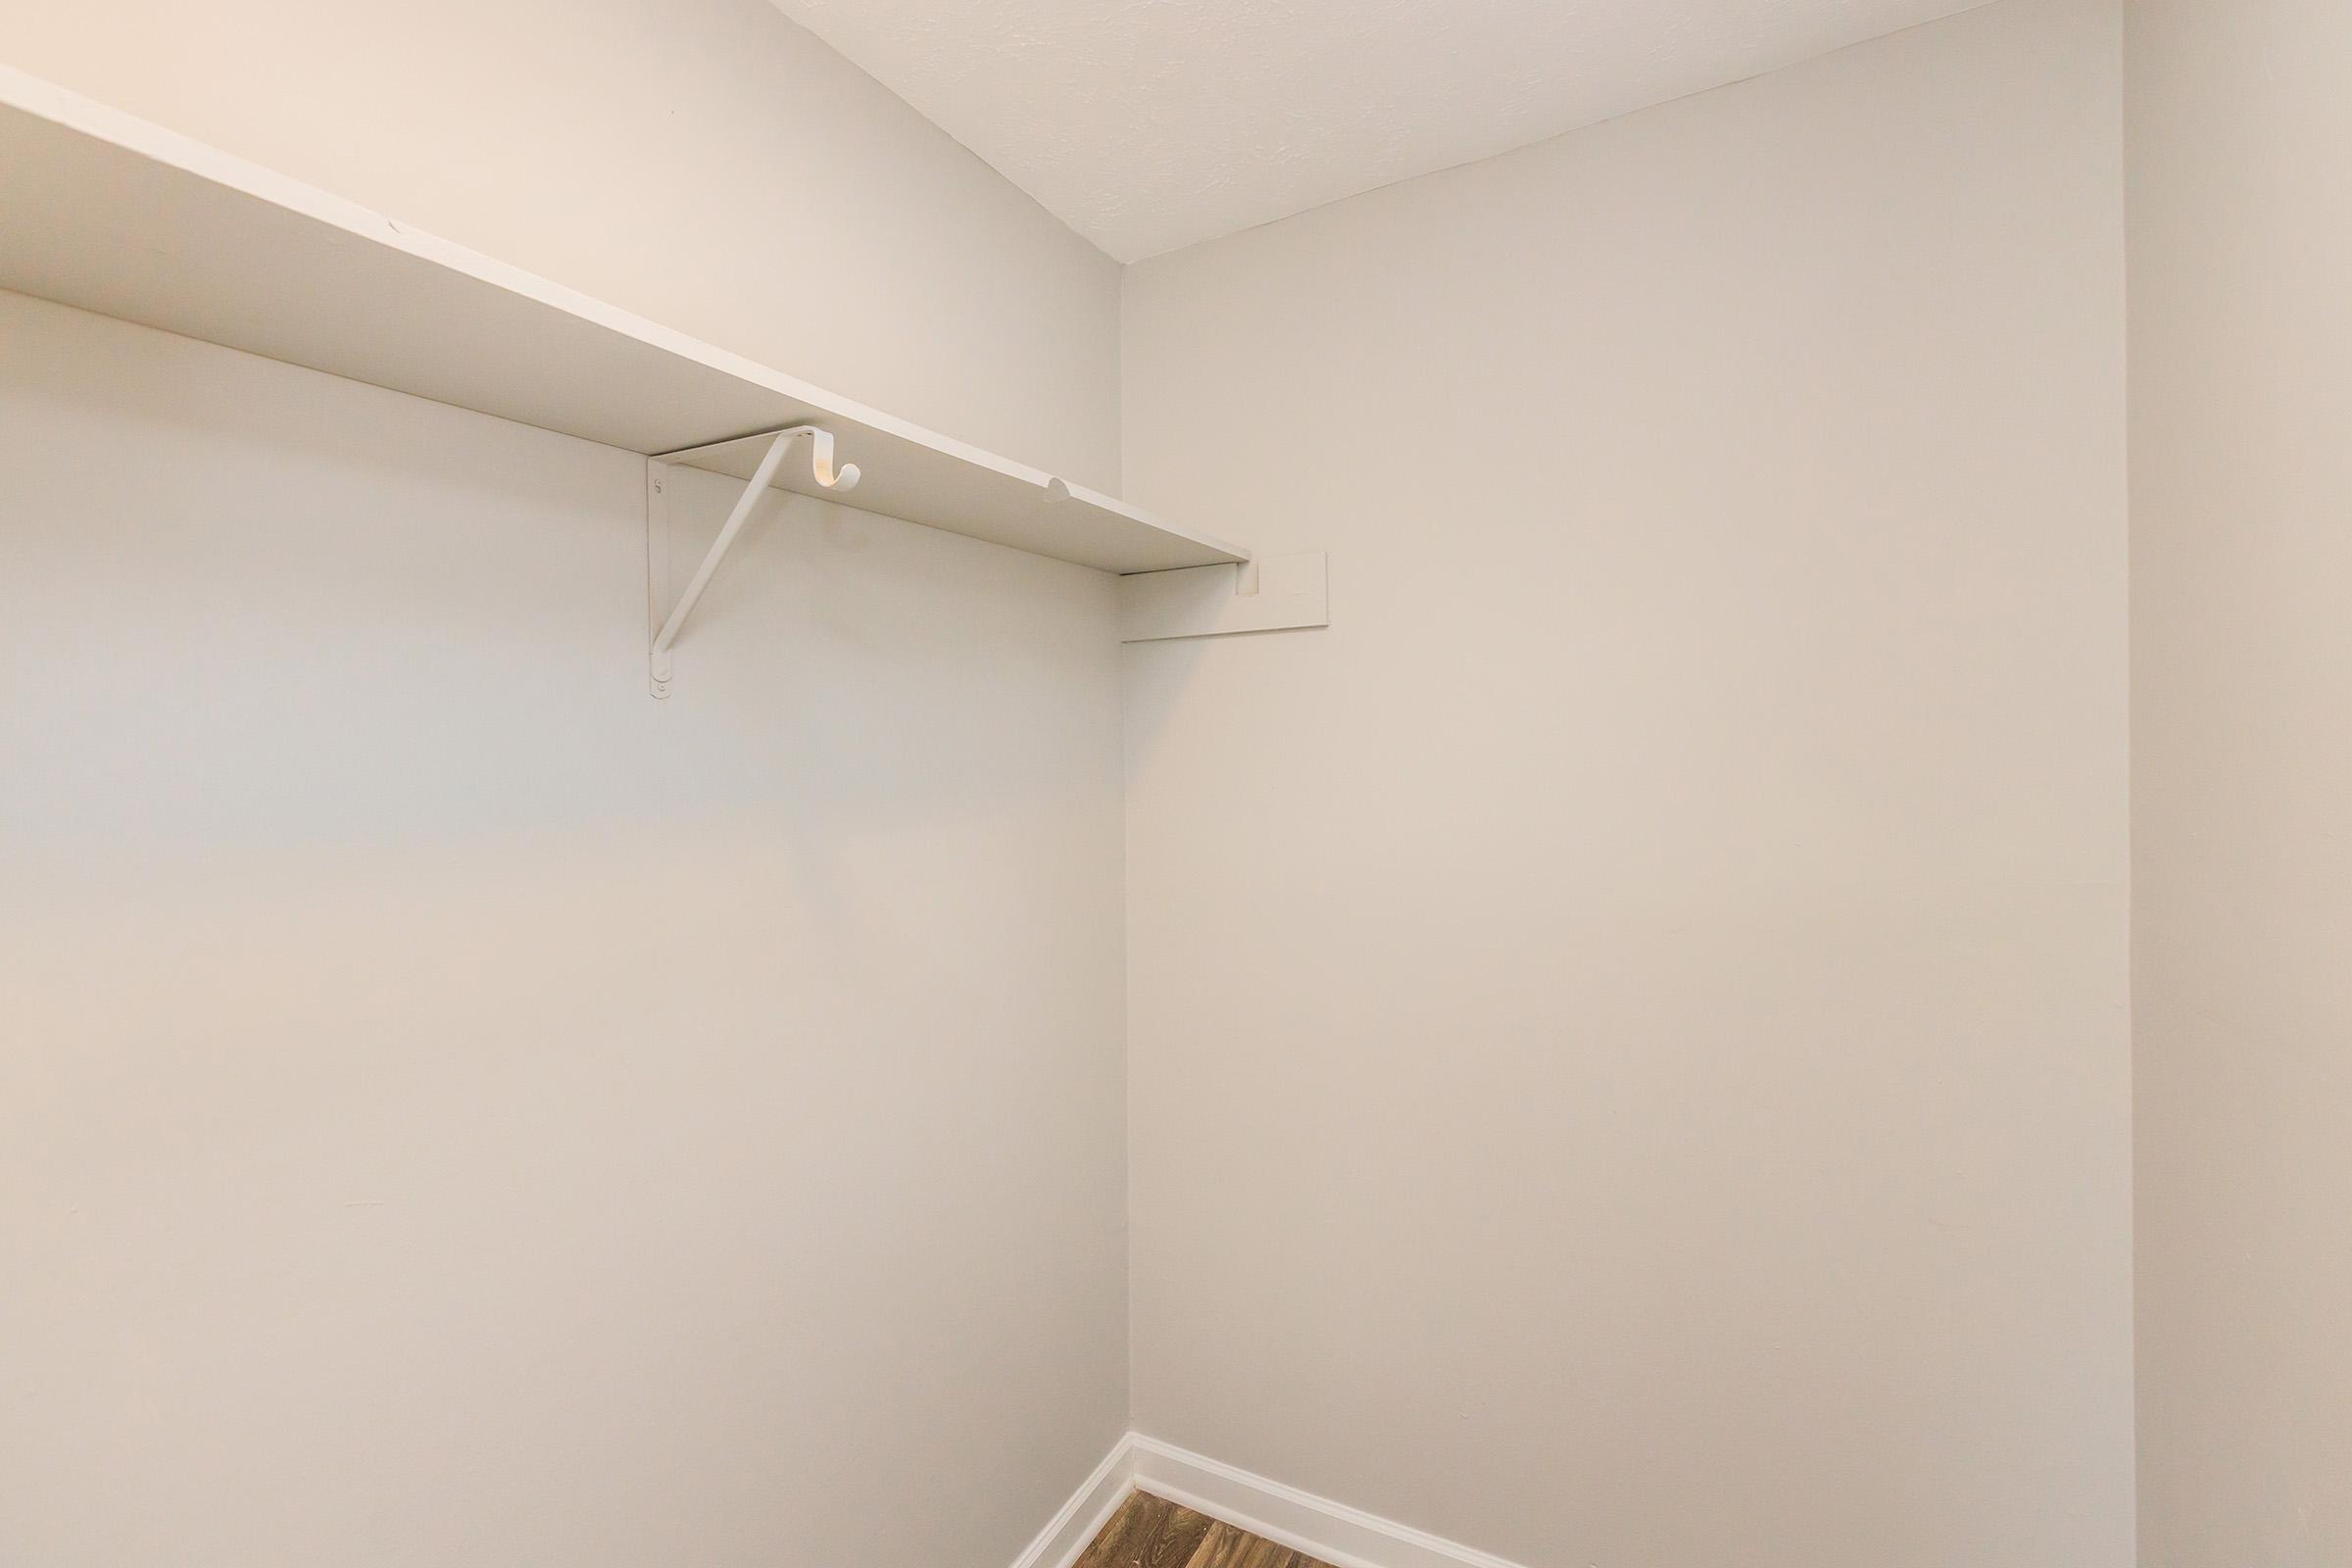 Walk-in closets are available in some homes